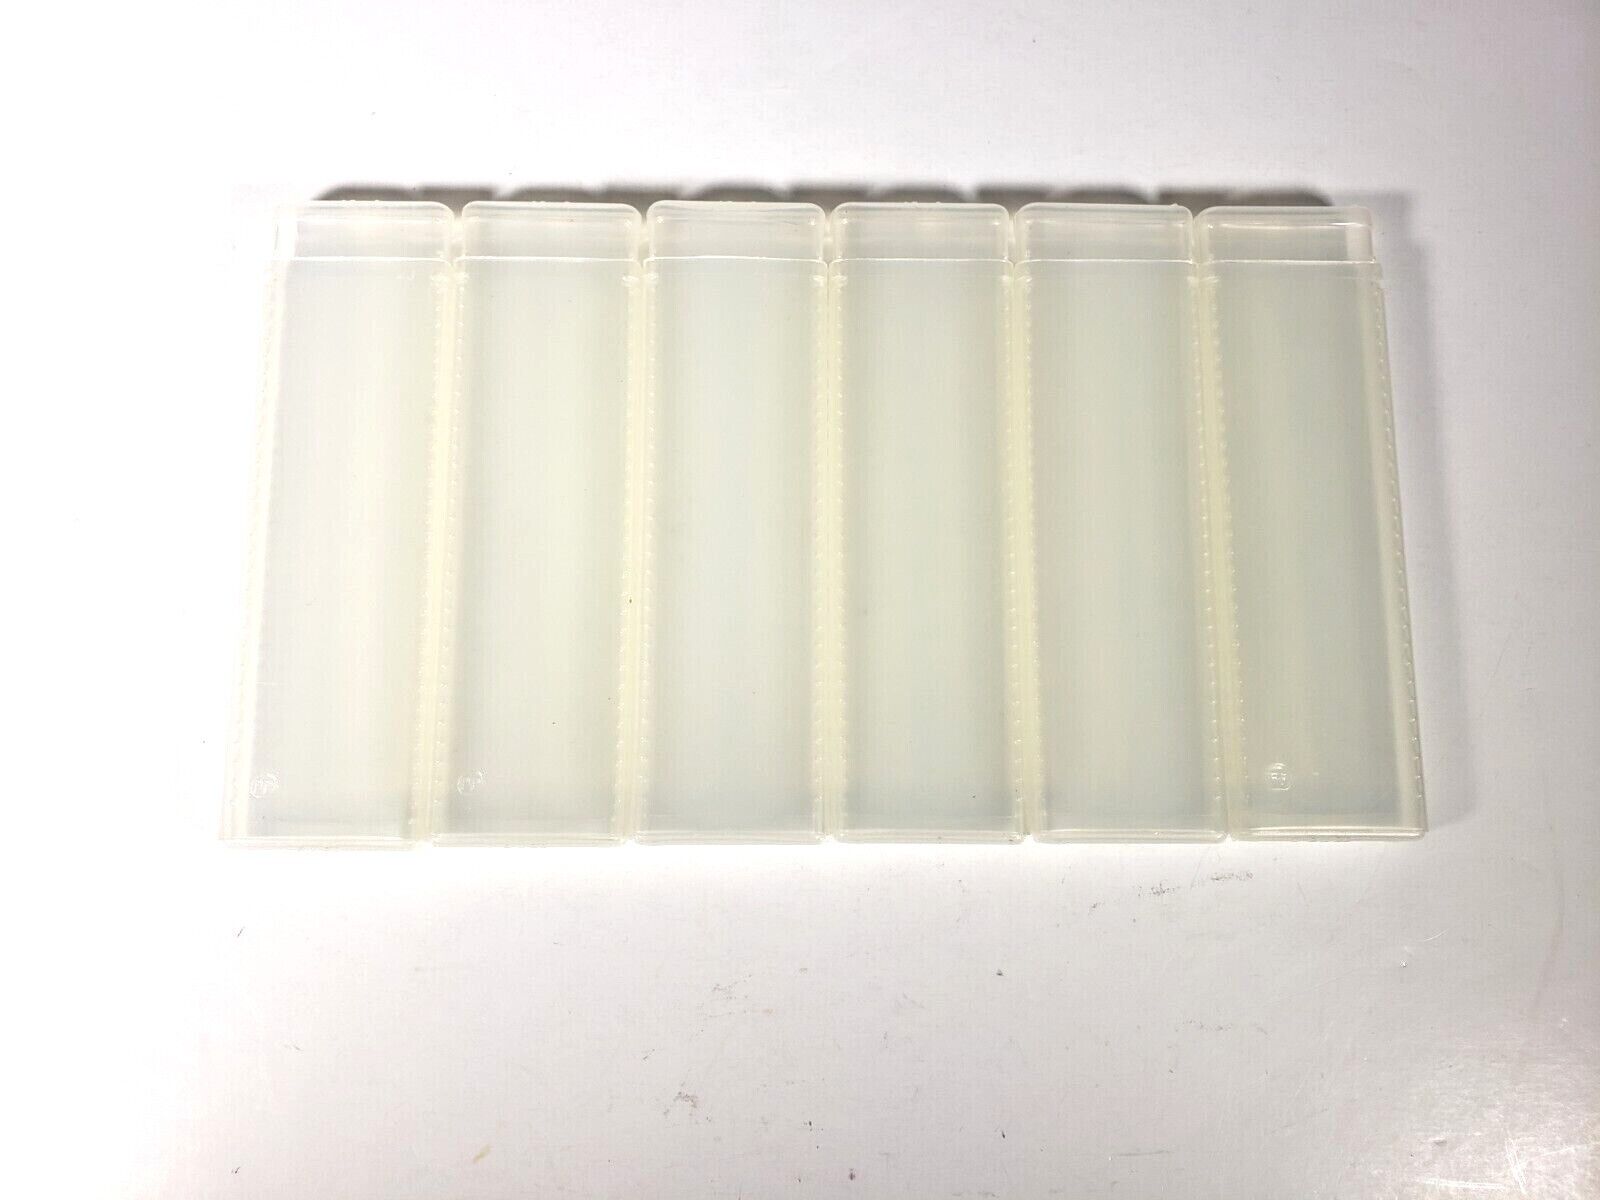 Lot of 6 Full Size Computer RAM Sliding Protective Case 5 1/2 in. Long